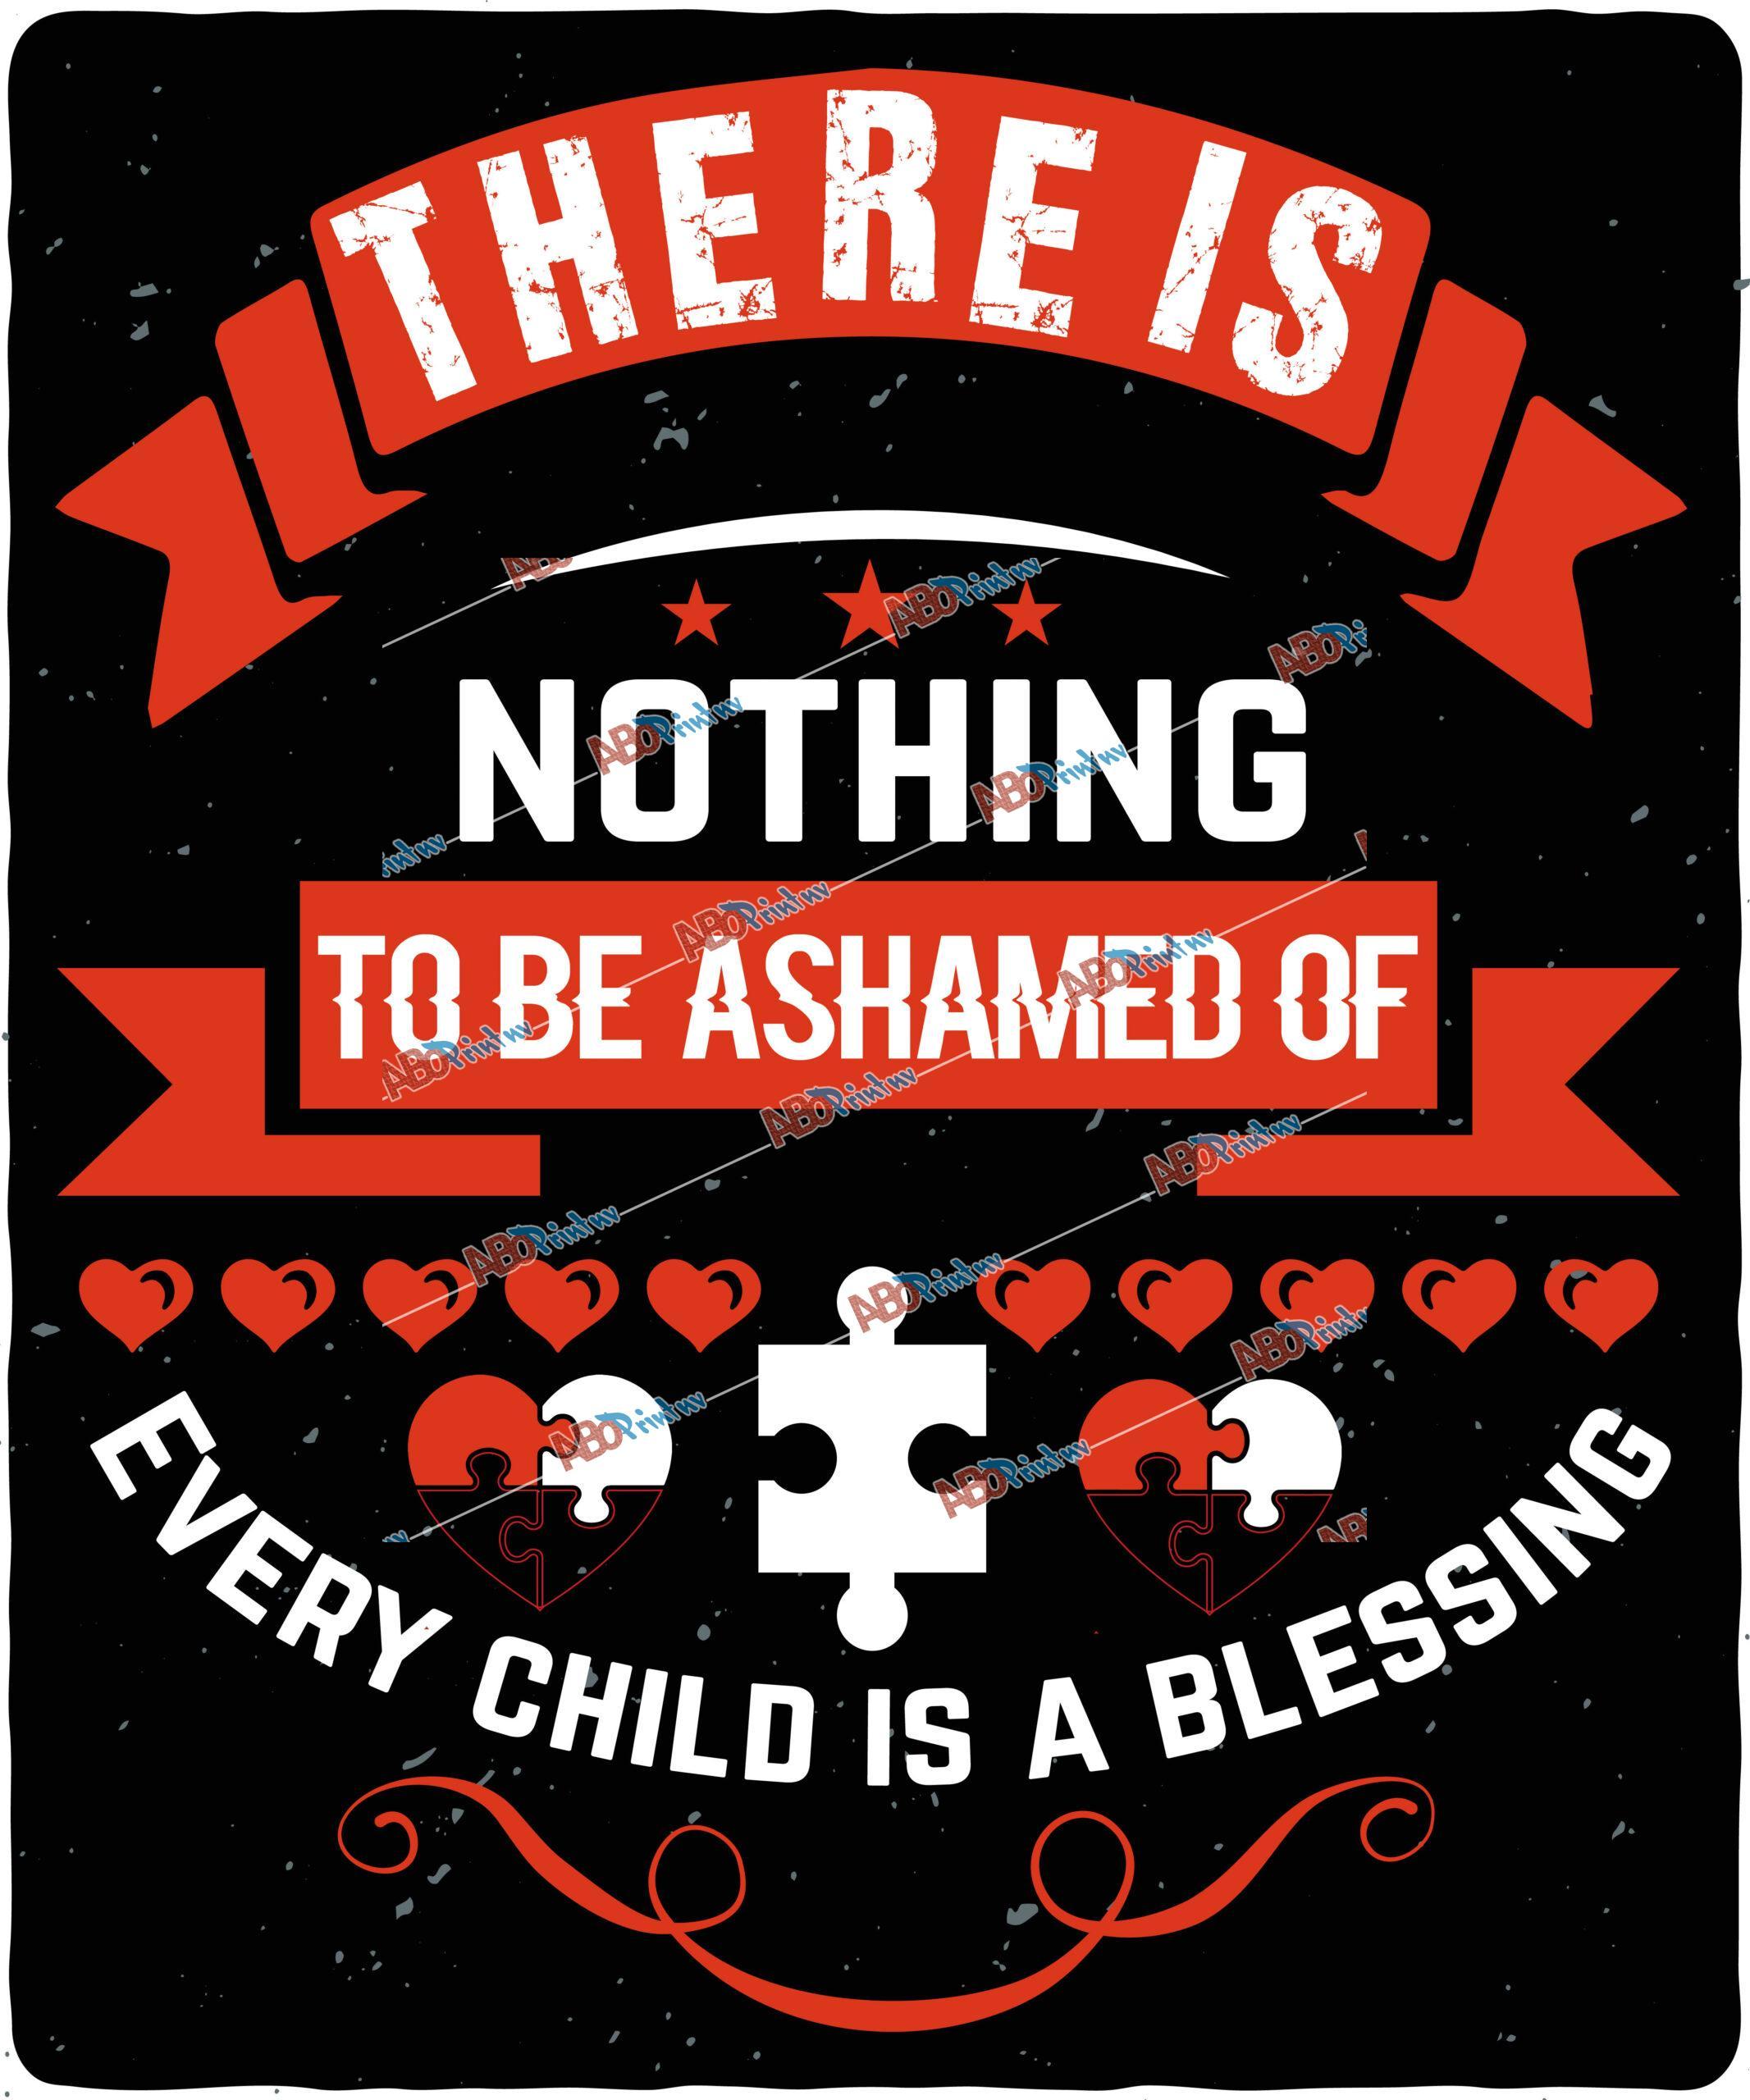 There is nothing to be ashamed of. Every child is a blessing